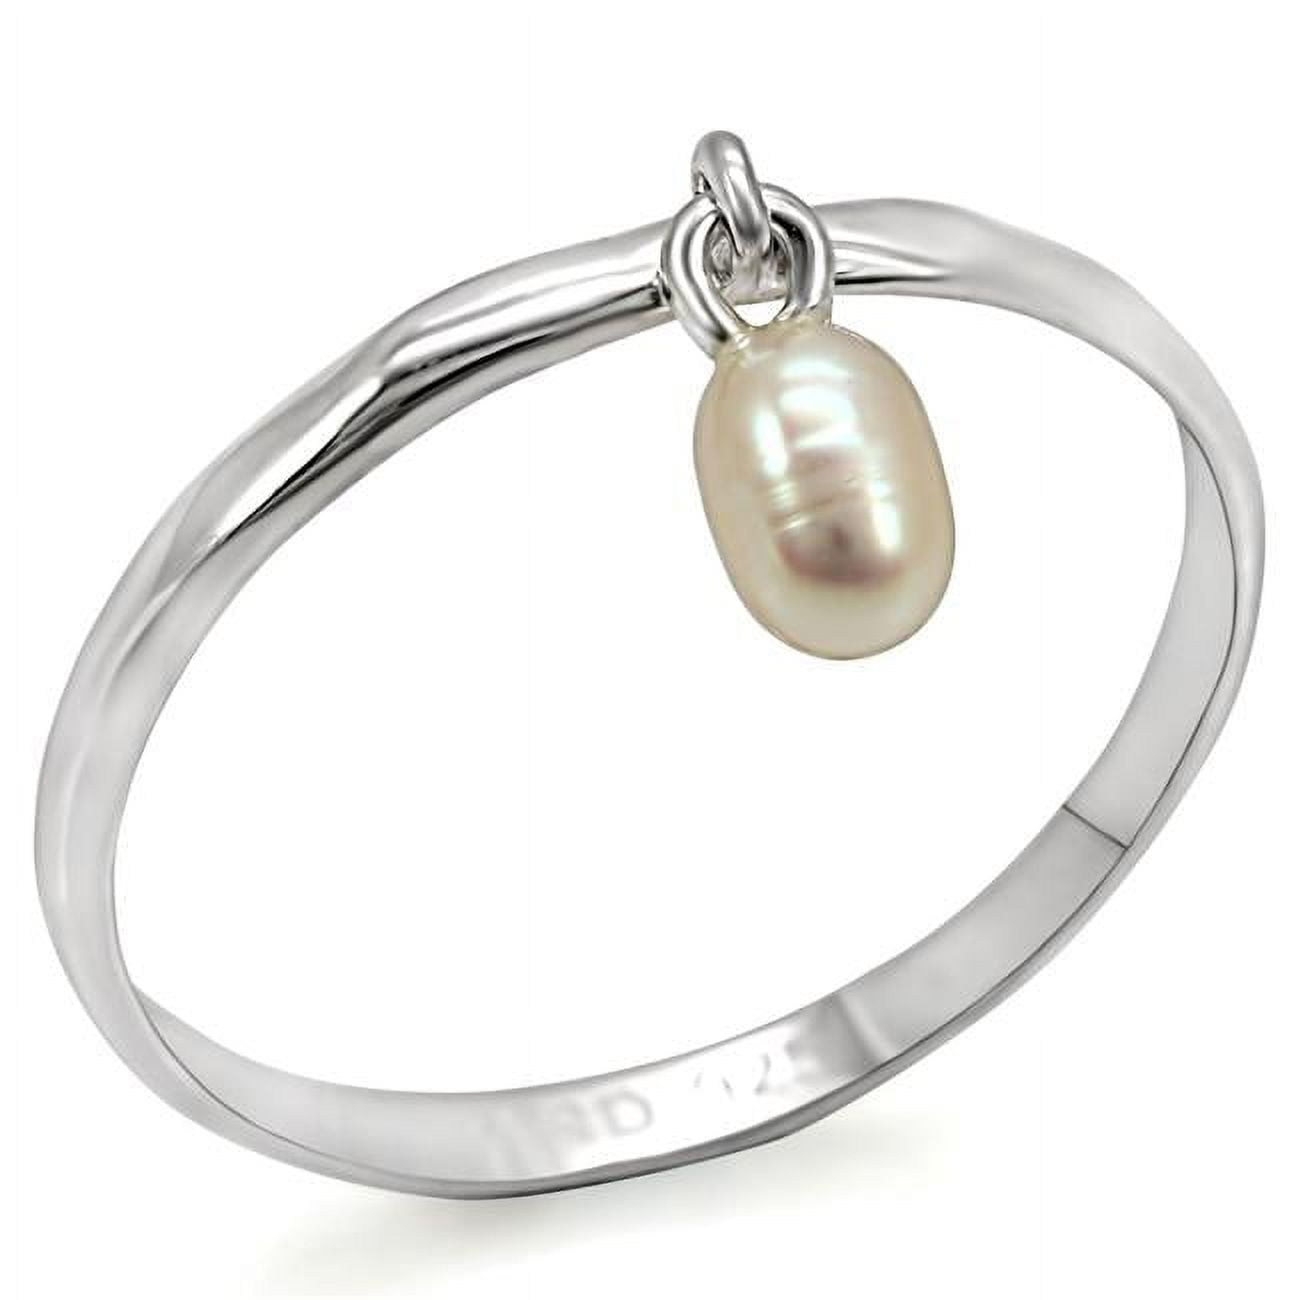 Picture of Alamode LOS317-6 Women Silver 925 Sterling Silver Ring with Semi-Precious in White - Size 6